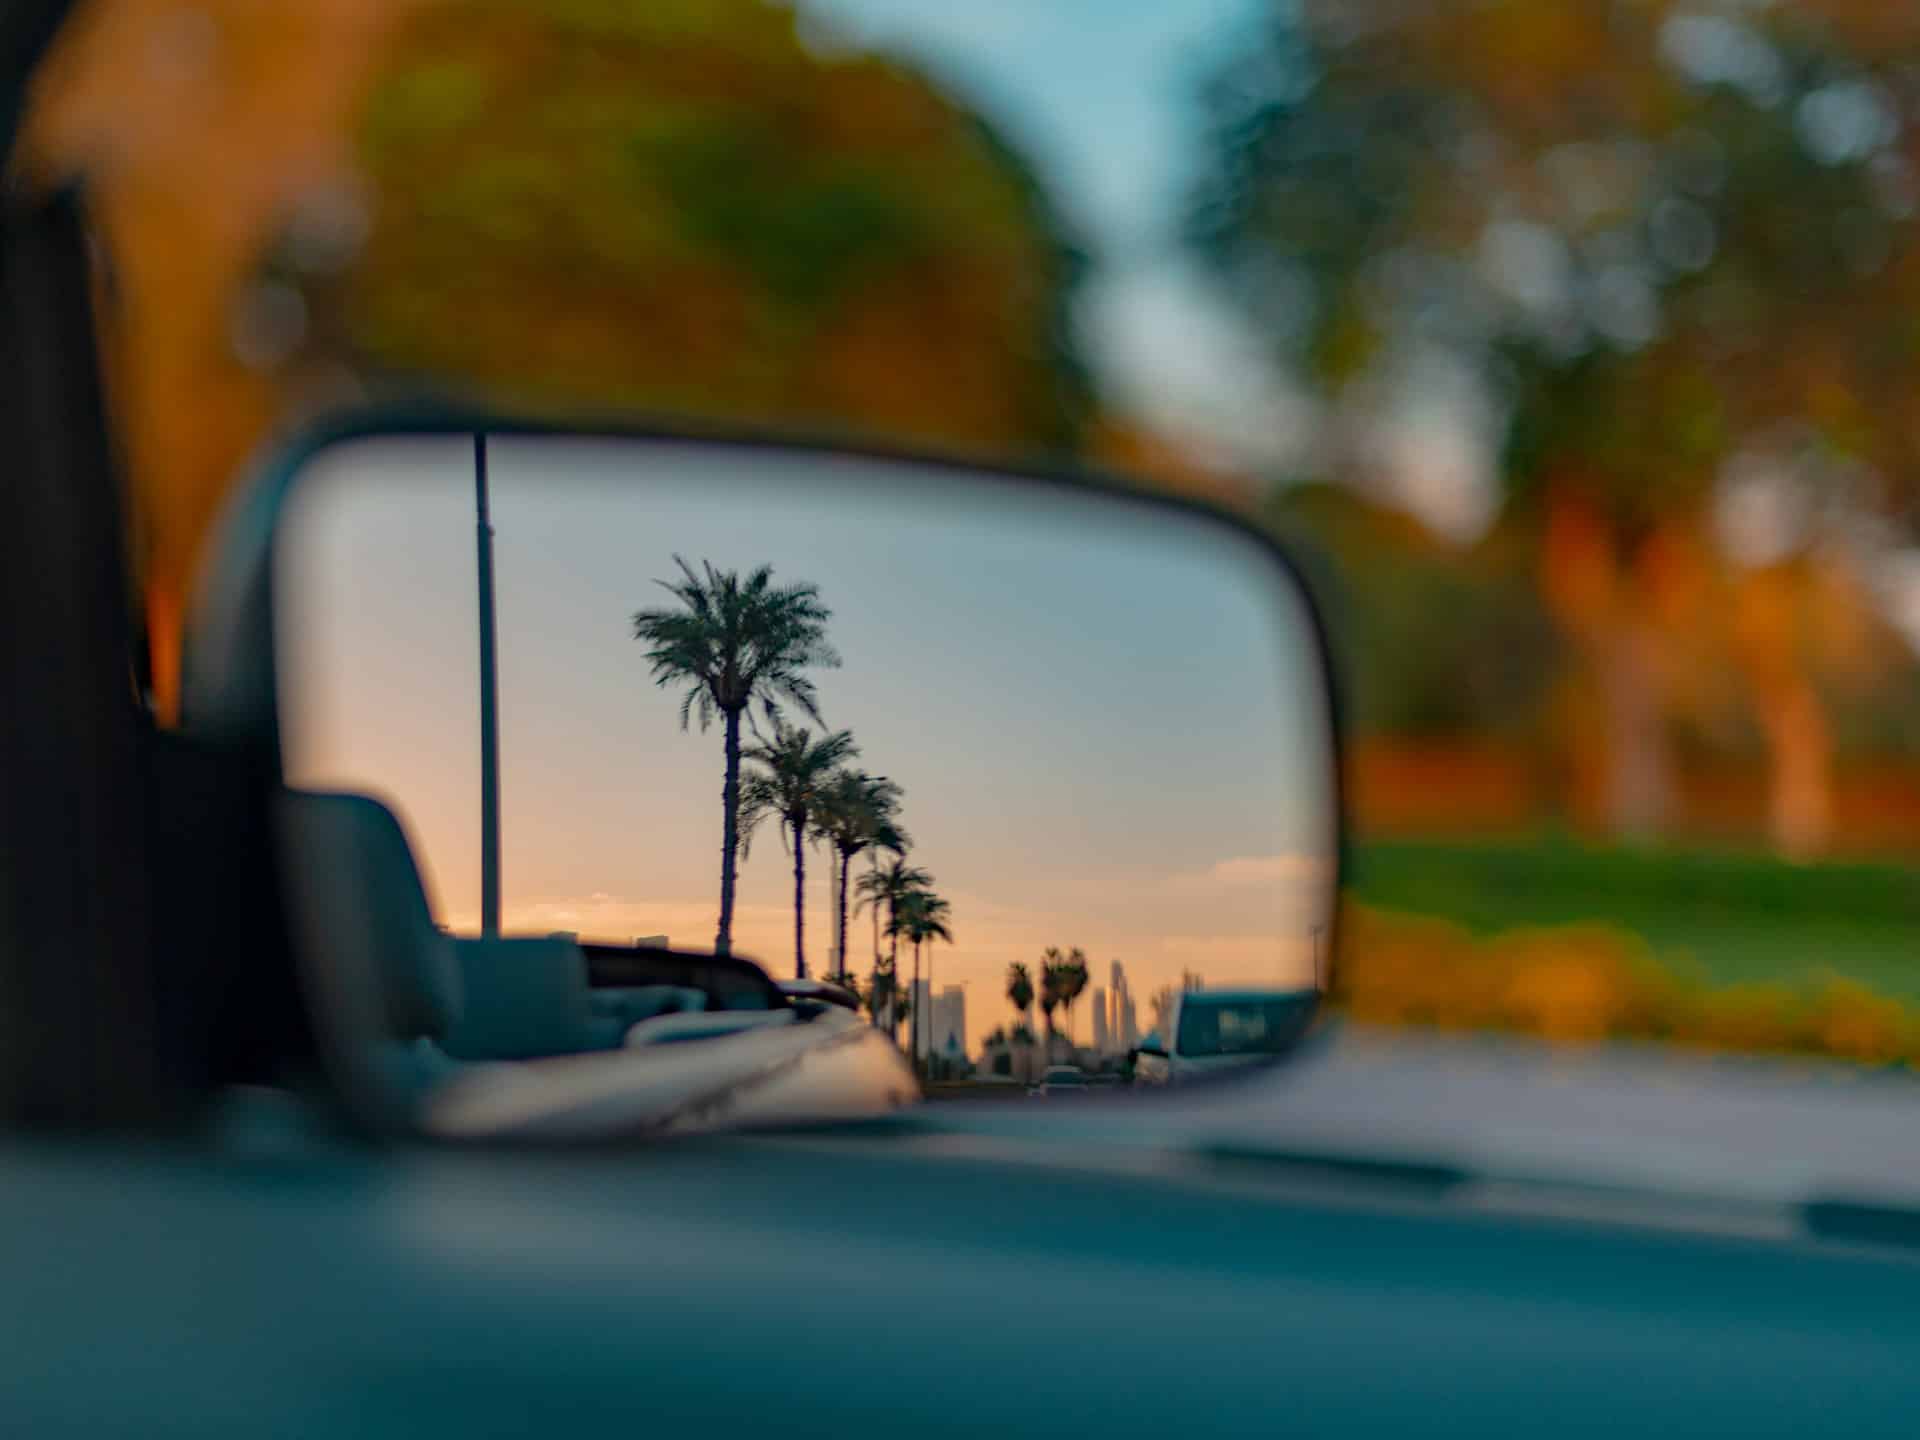 a rear view mirror reflecting palm trees